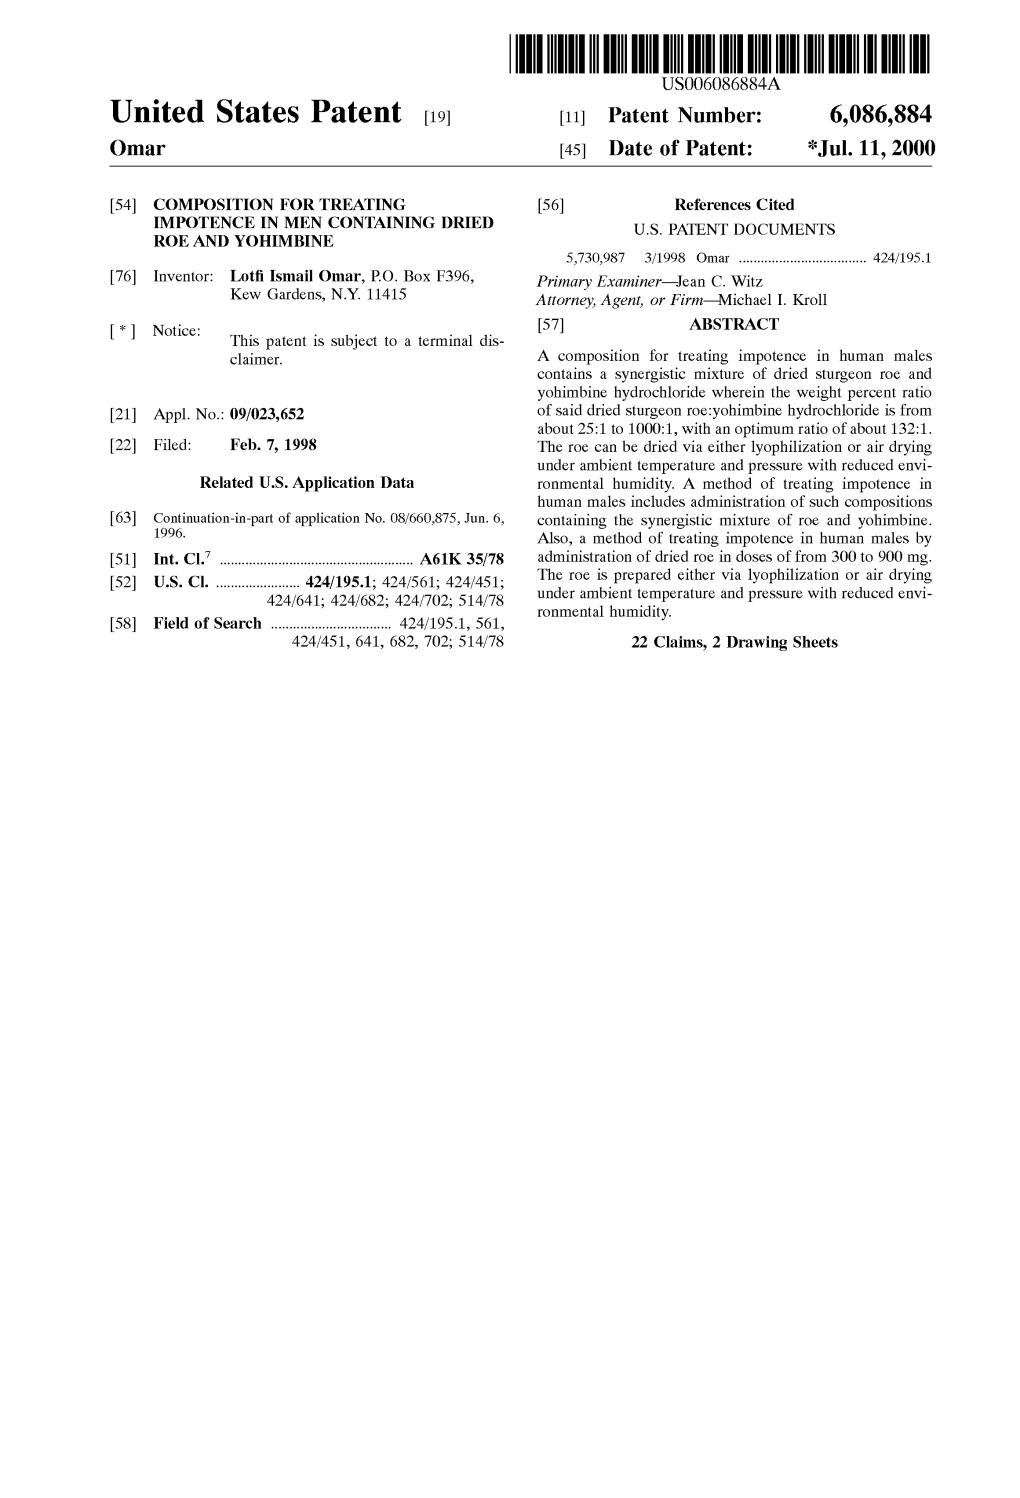 United States Patent (19) 11 Patent Number: 6,086,884 Omar (45) Date of Patent: *Jul